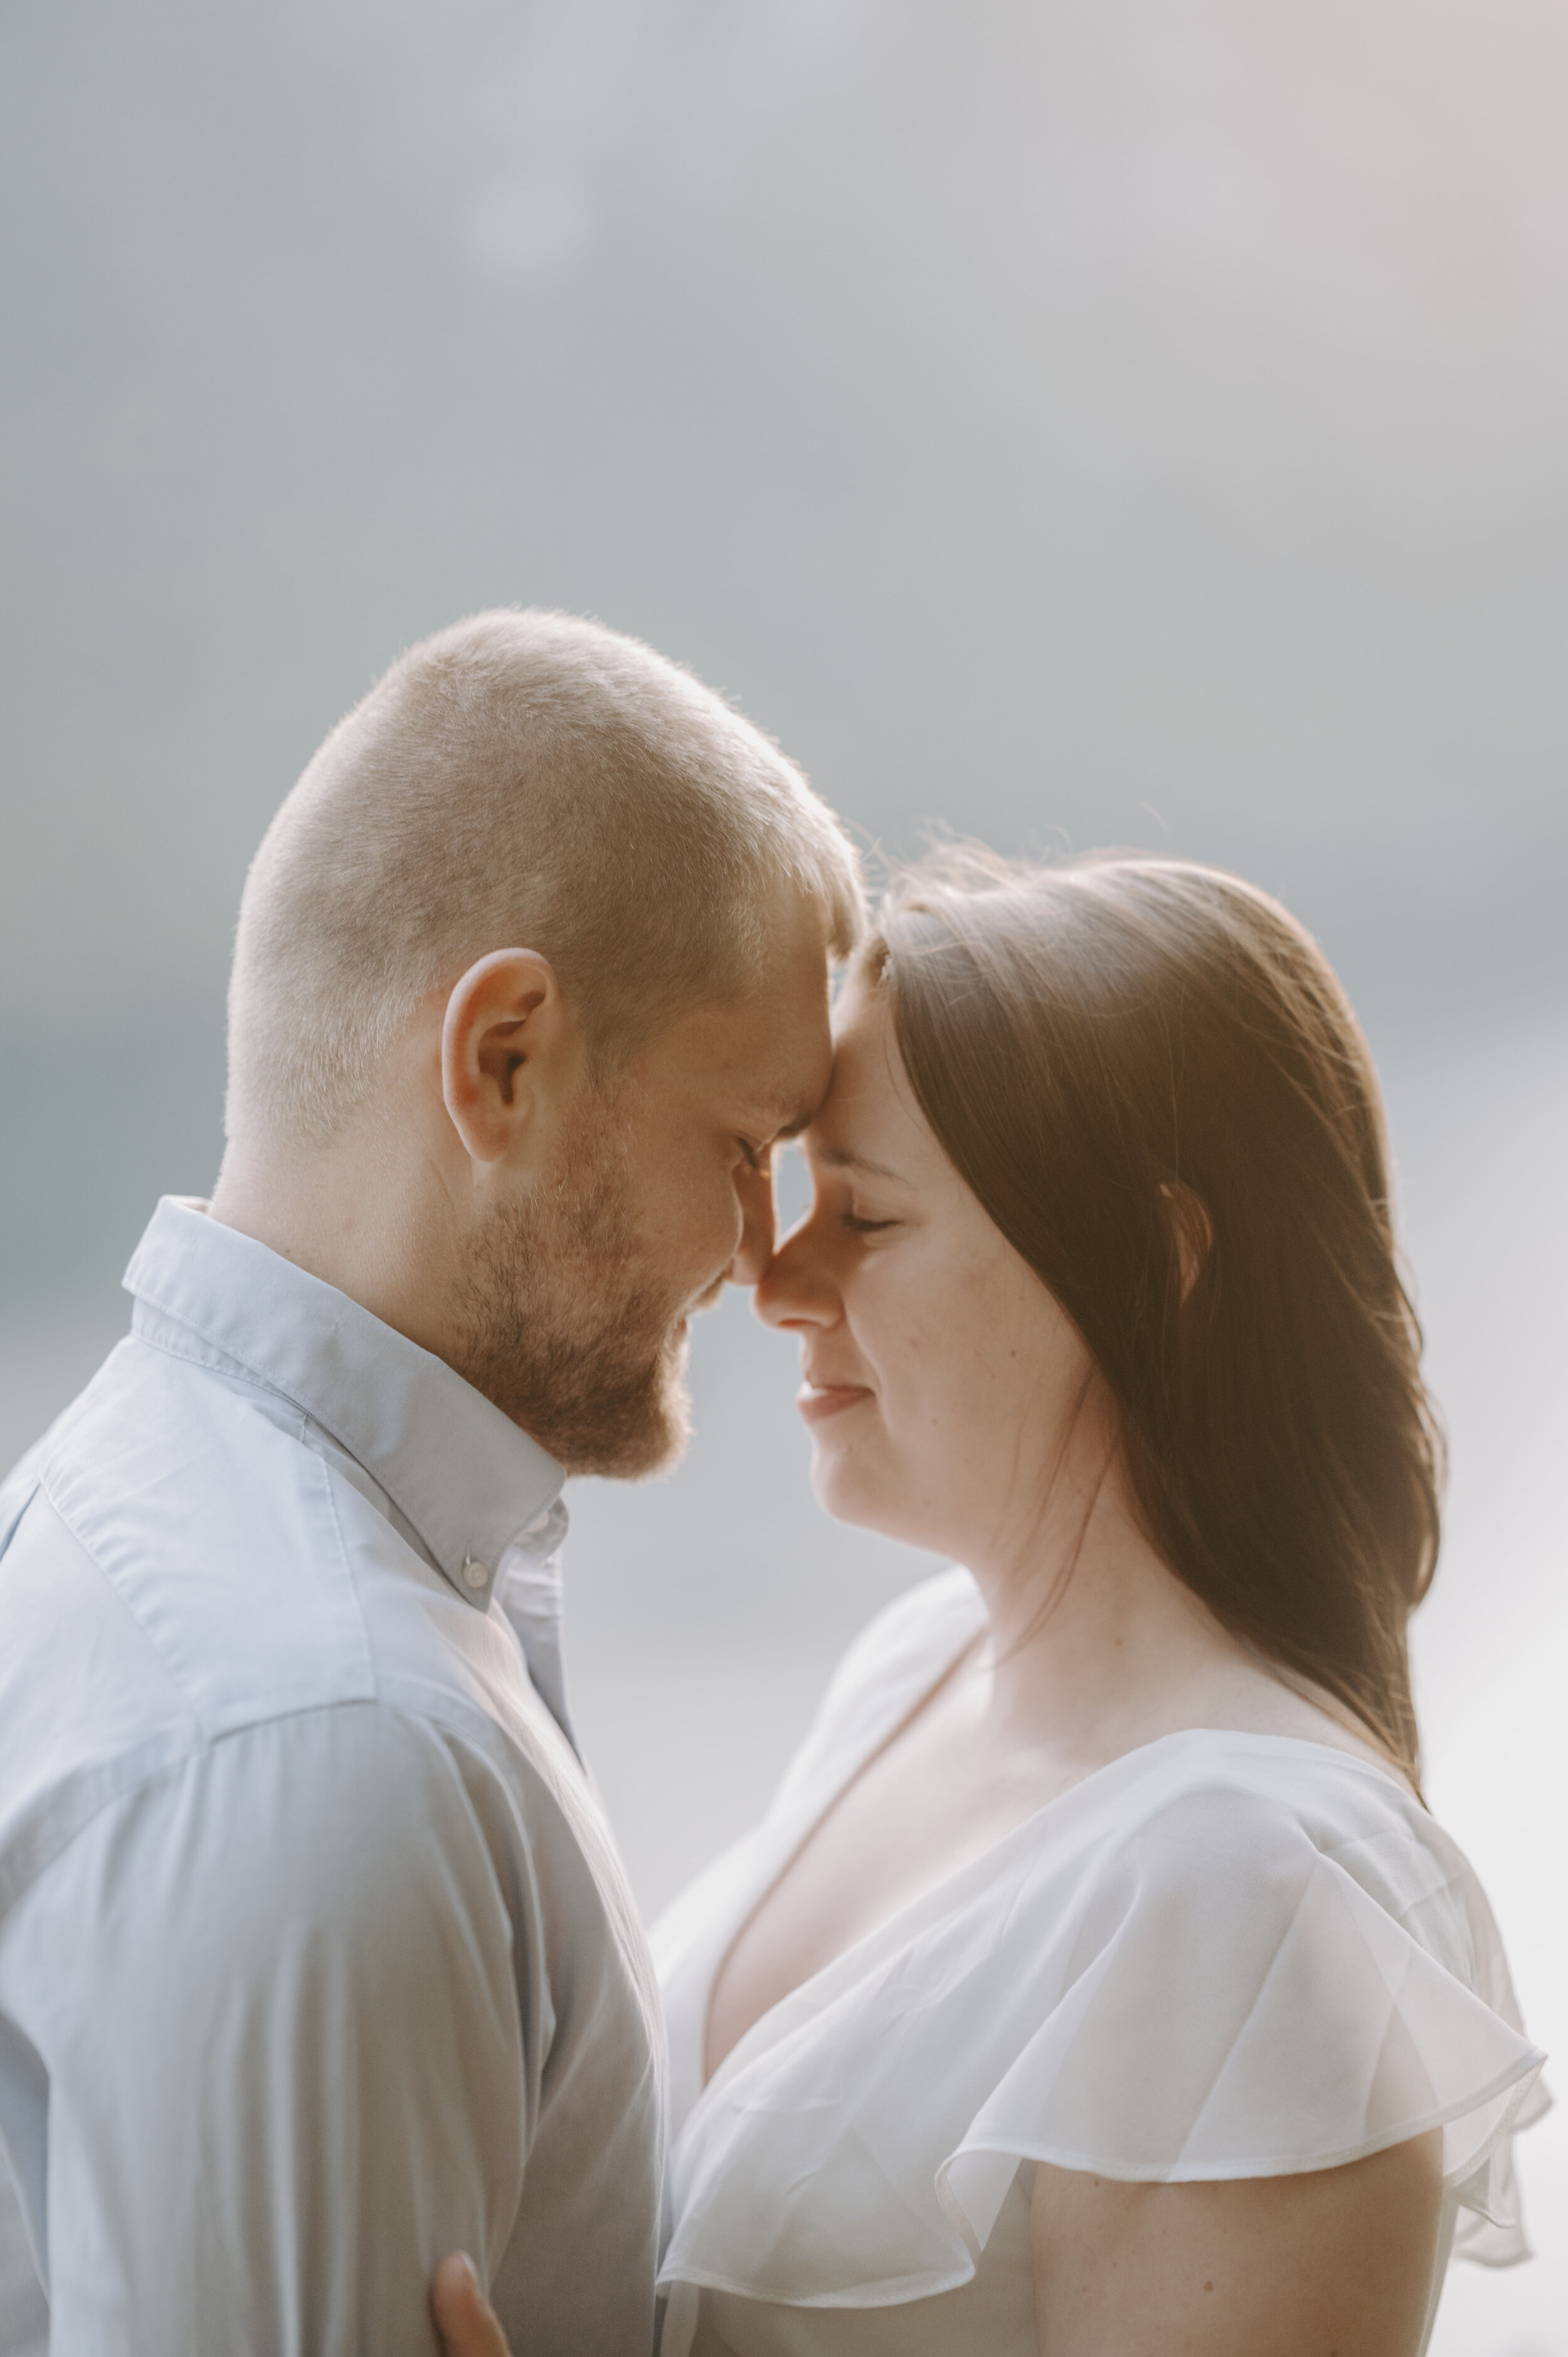 Vermont wedding photographer/ Lake Willougby engagement session